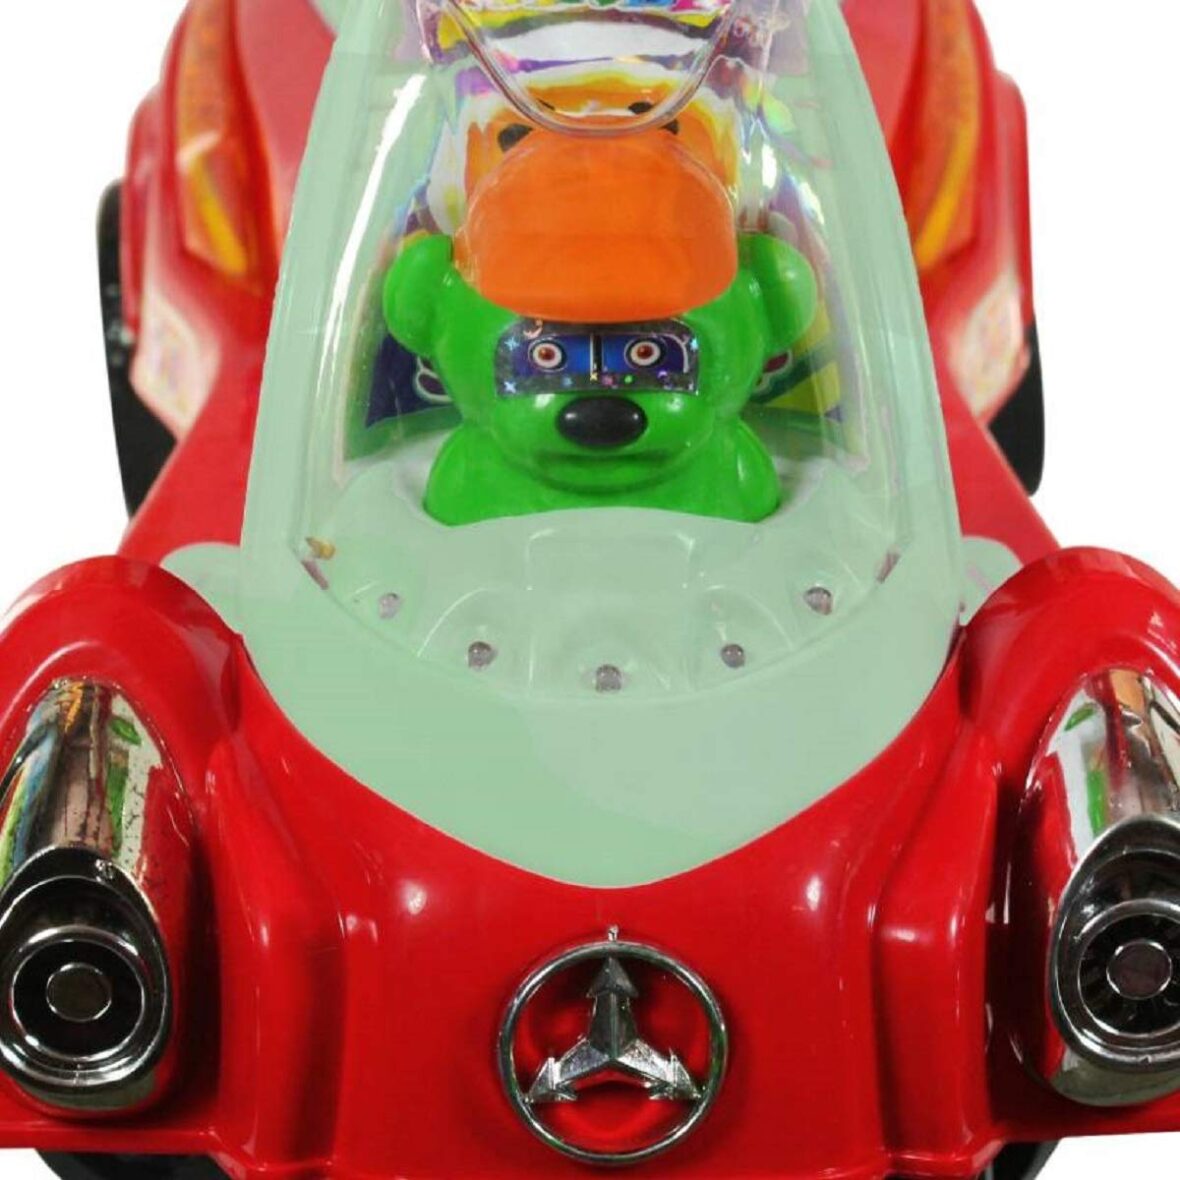 7 U Smile Plastic Space Swing Car for Kids (Red)